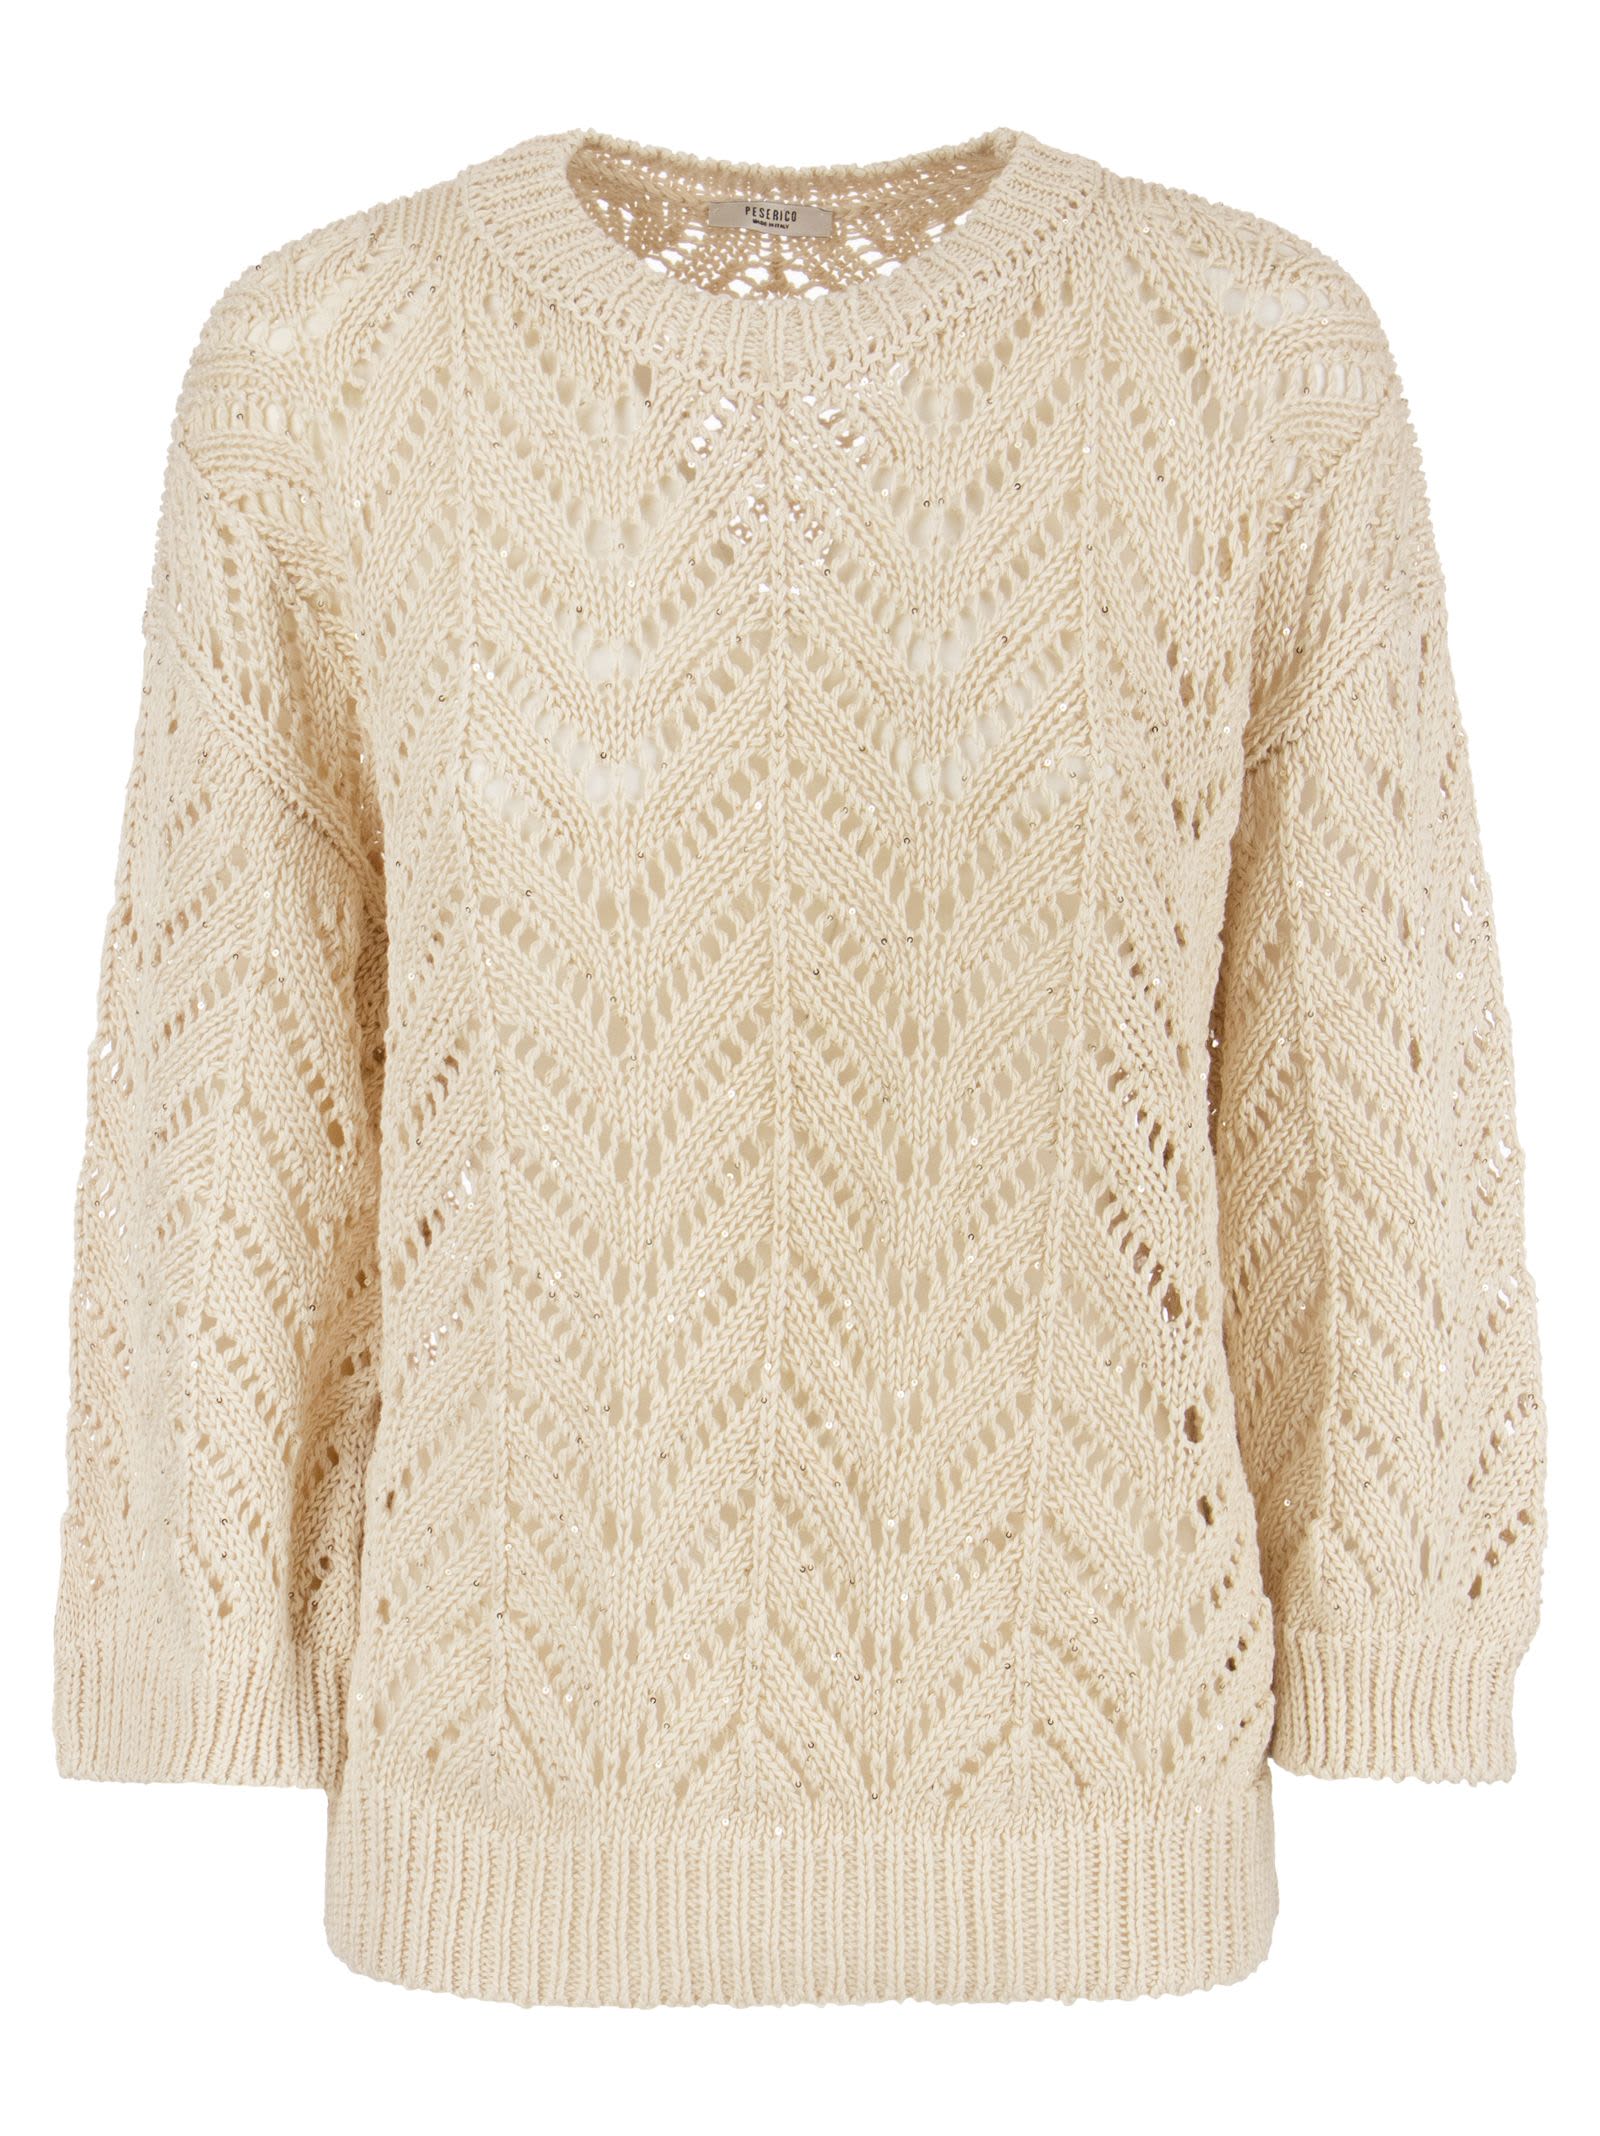 Peserico Cotton Yarn Sweater With Sequins